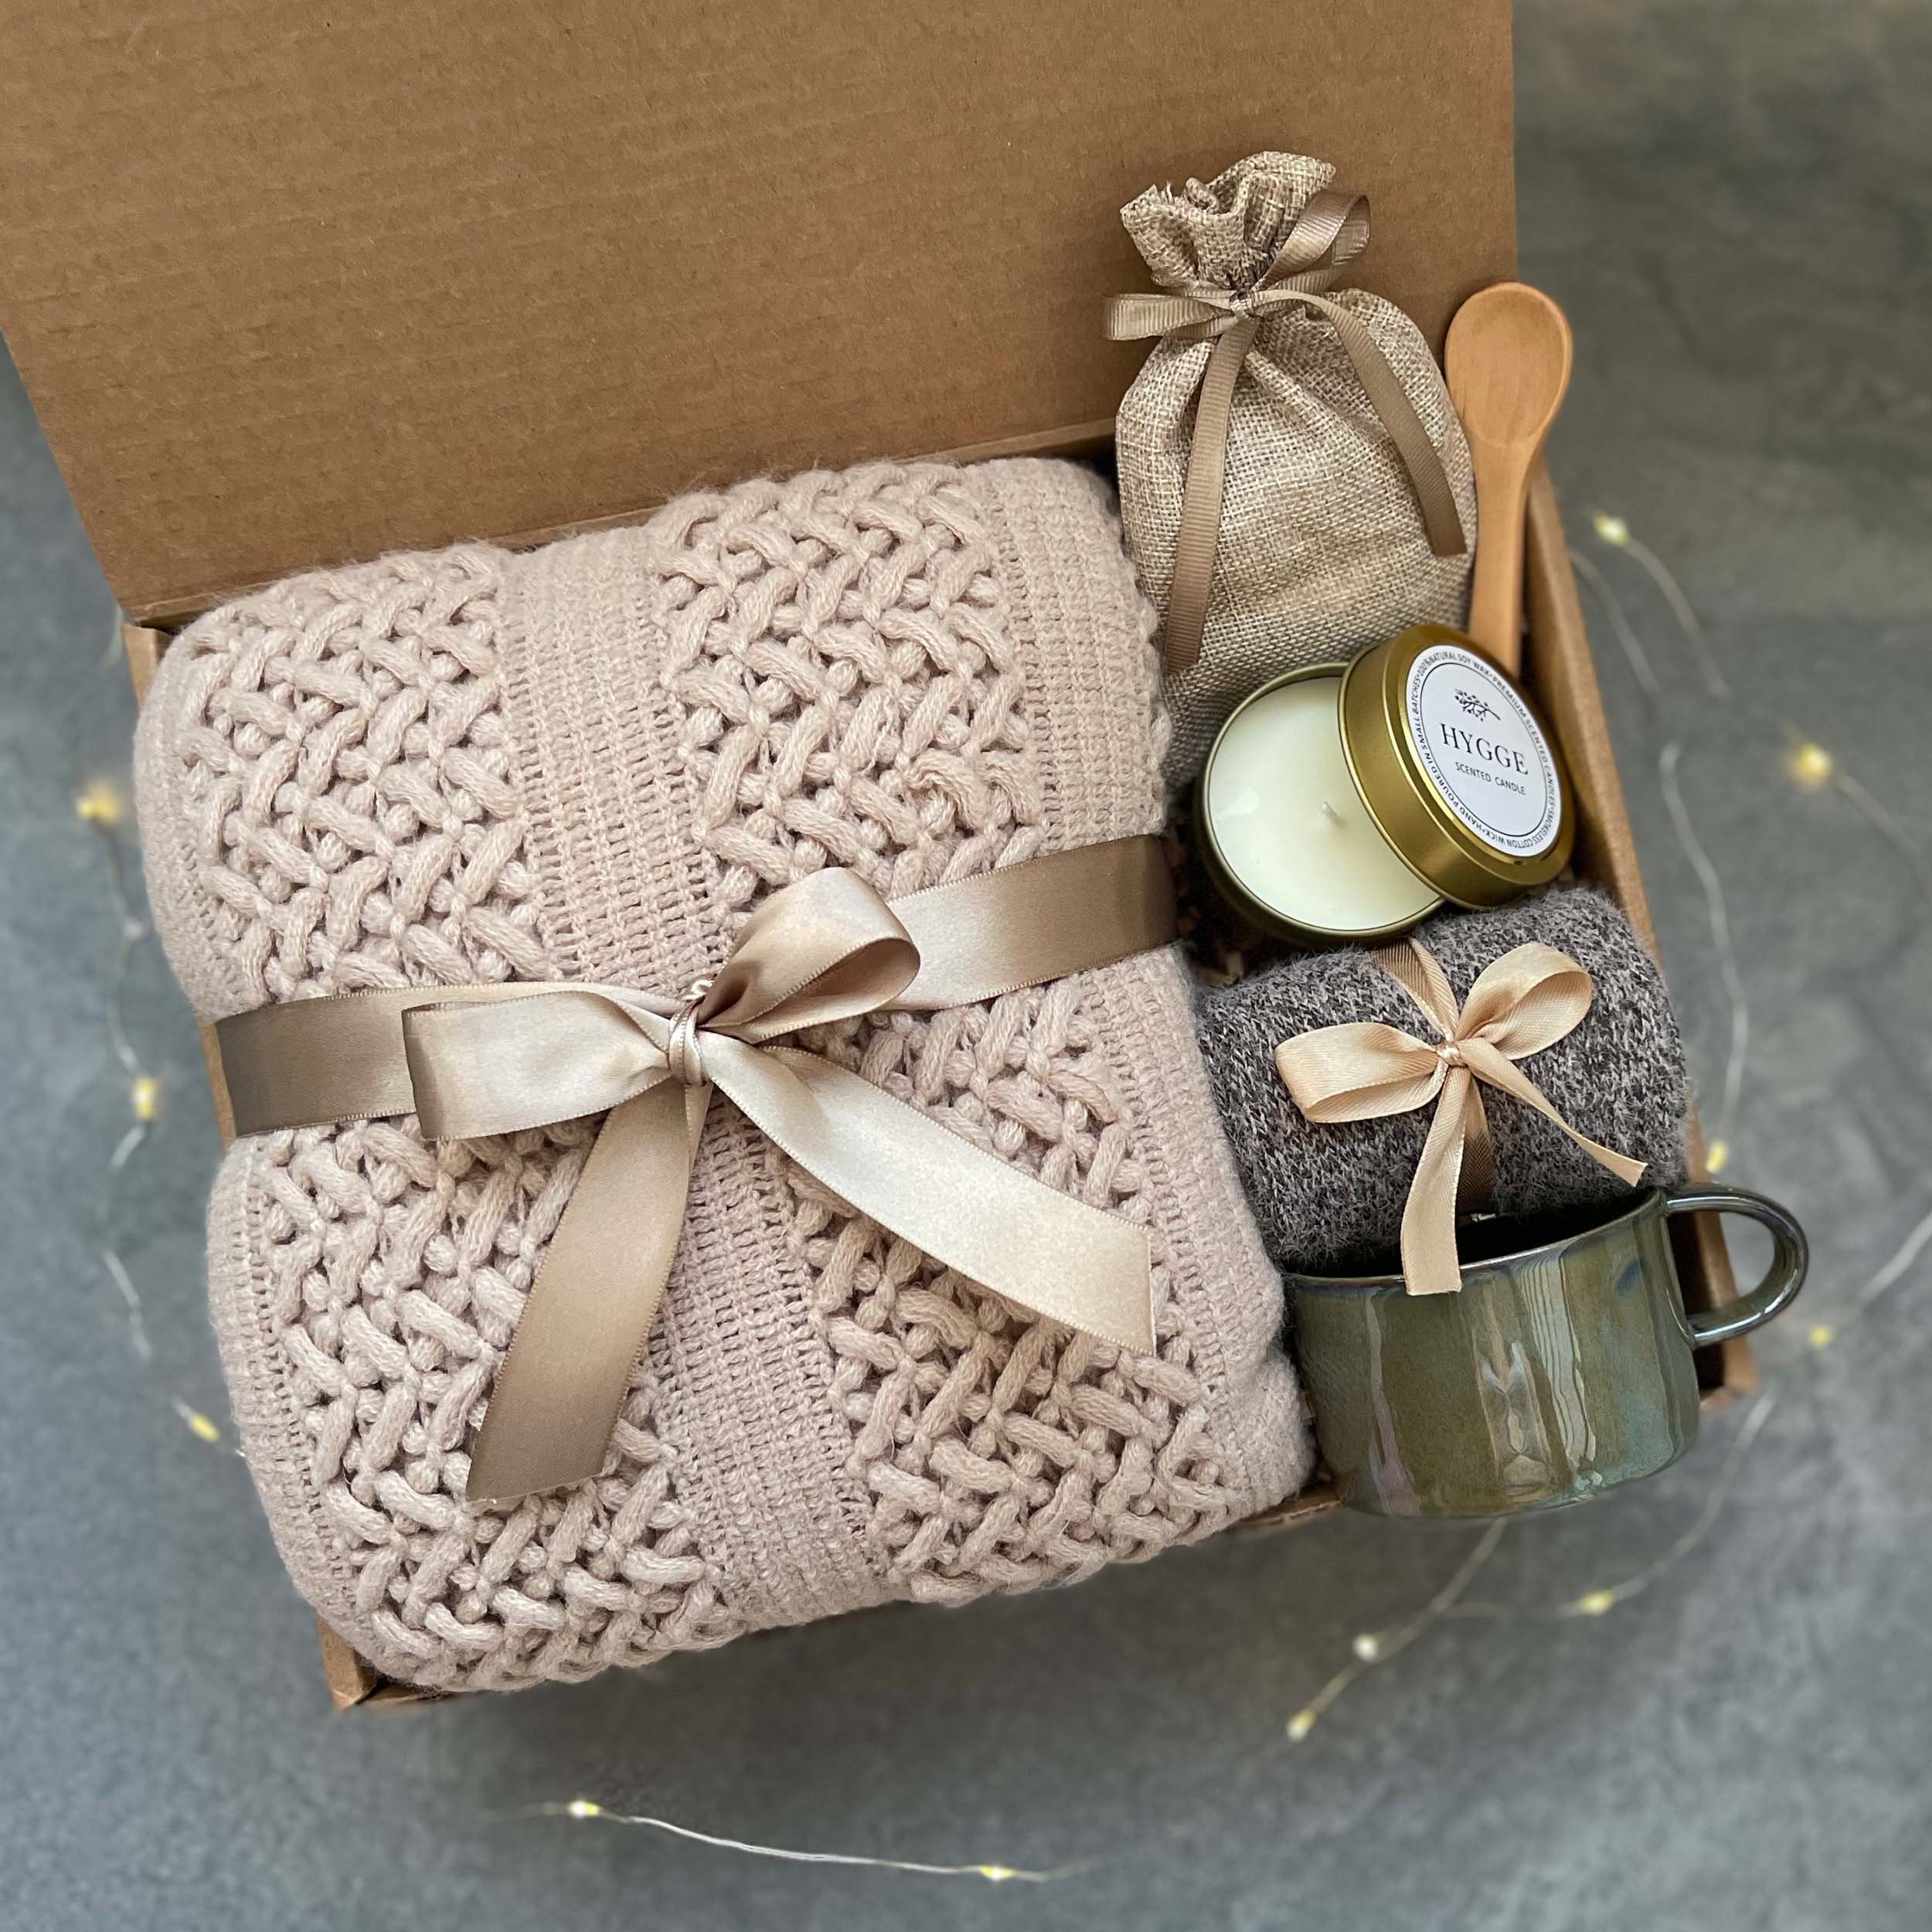 Cozy Gifts for Her - Affordable by Amanda